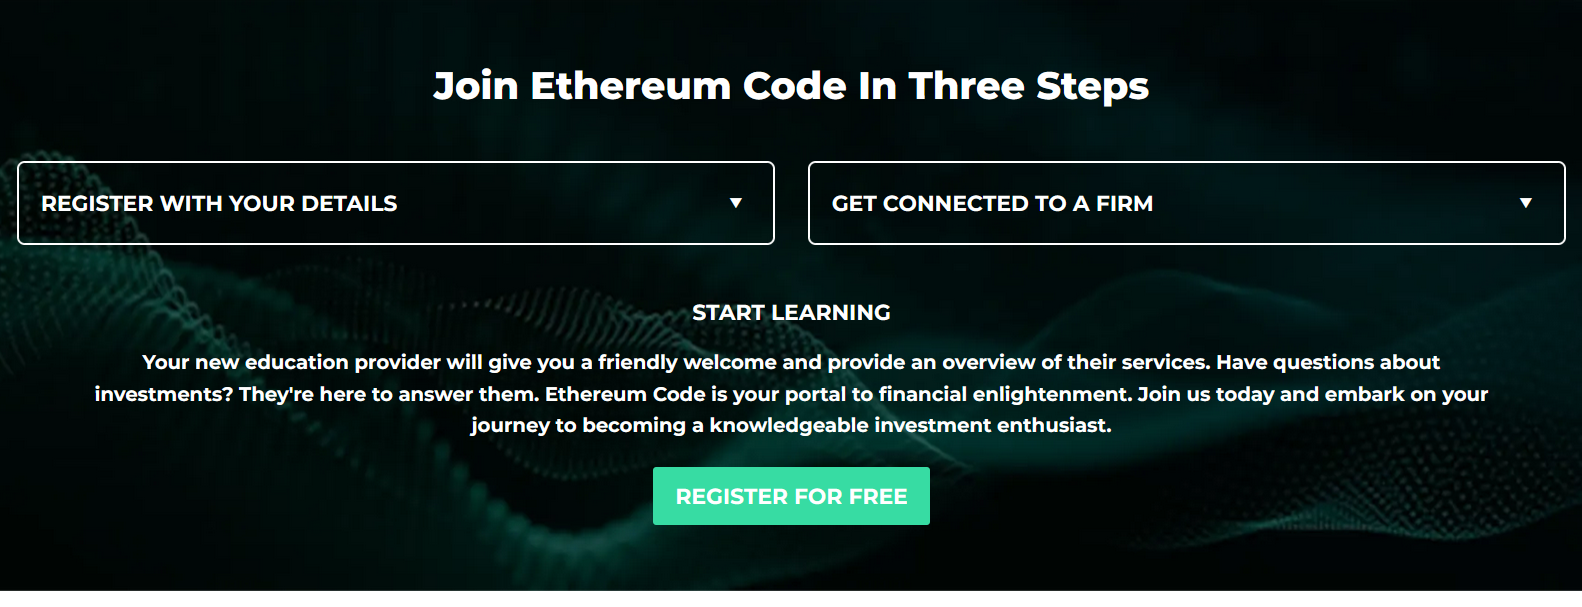 join-ethereum-code